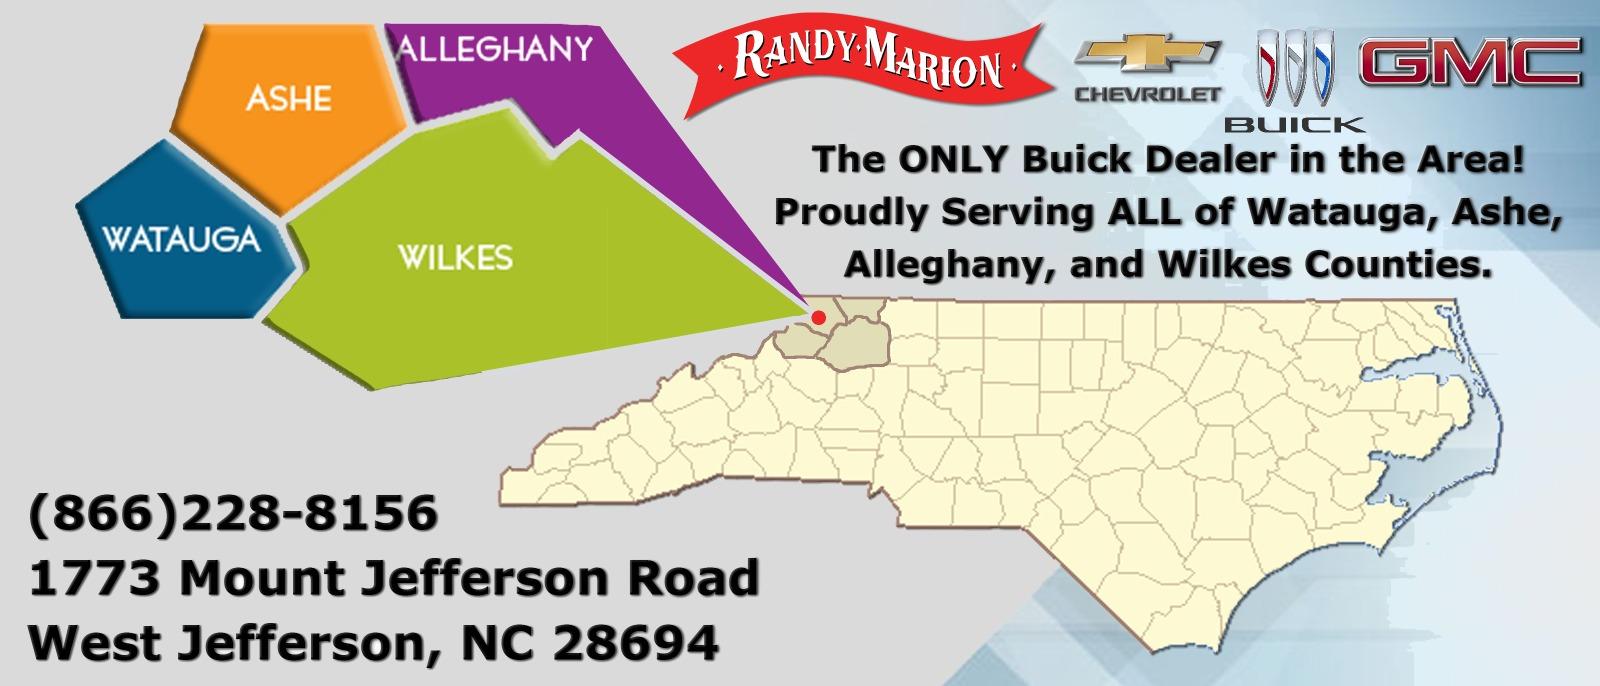 The ONLY Buick Dealer in the Area! Proudly Serving ALL of Watauga, Ashe, Alleghany, and Wilkes Counties.